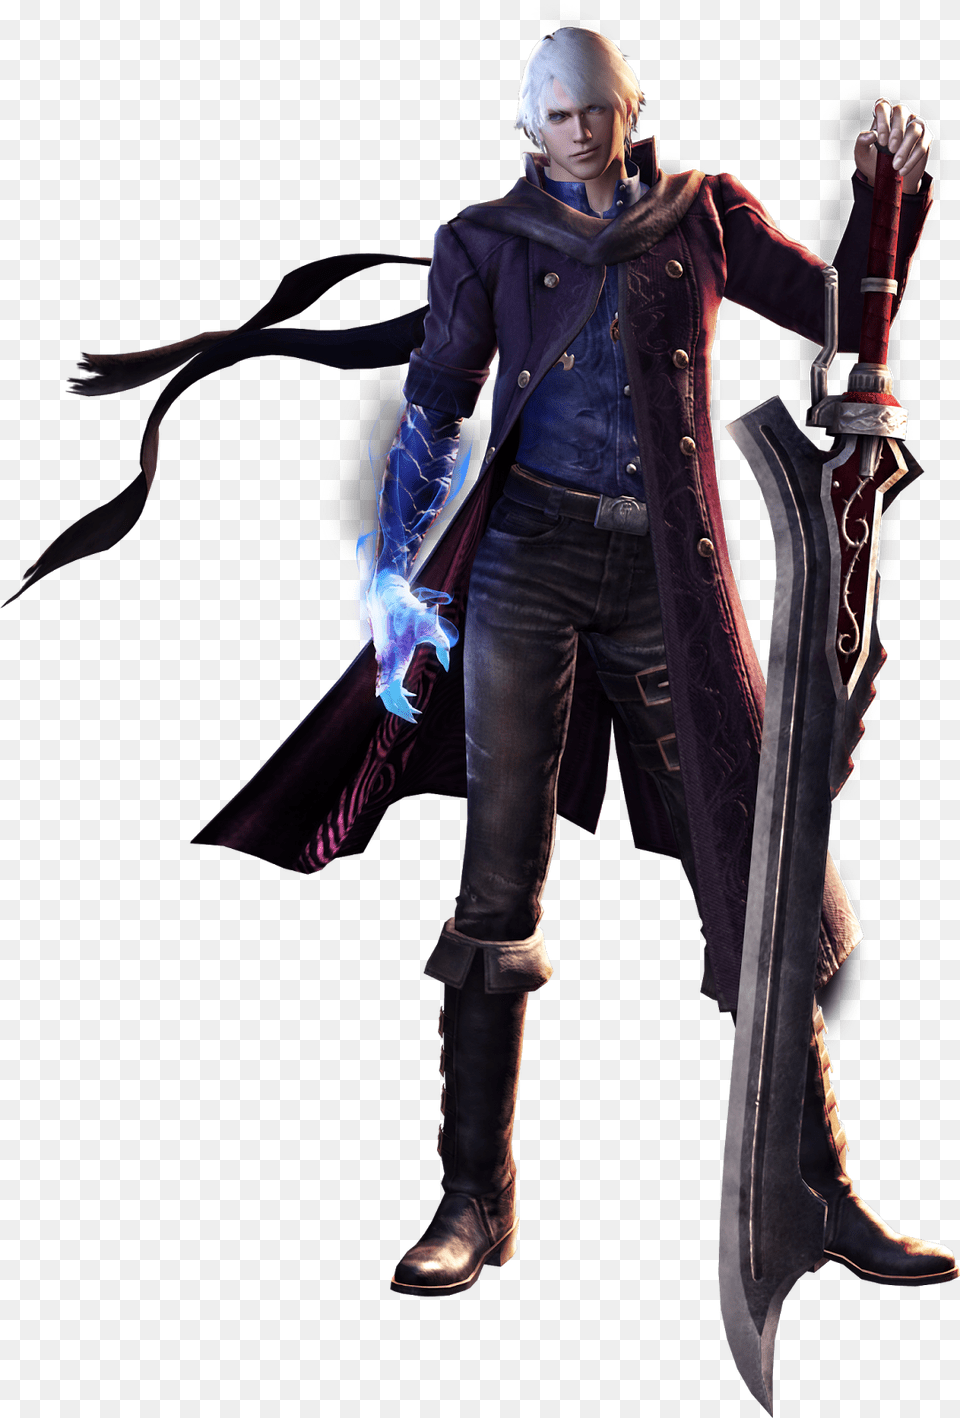 And Now Lots Of Art And Screens Devil May Cry Personajes, Weapon, Sword, Clothing, Coat Free Png Download